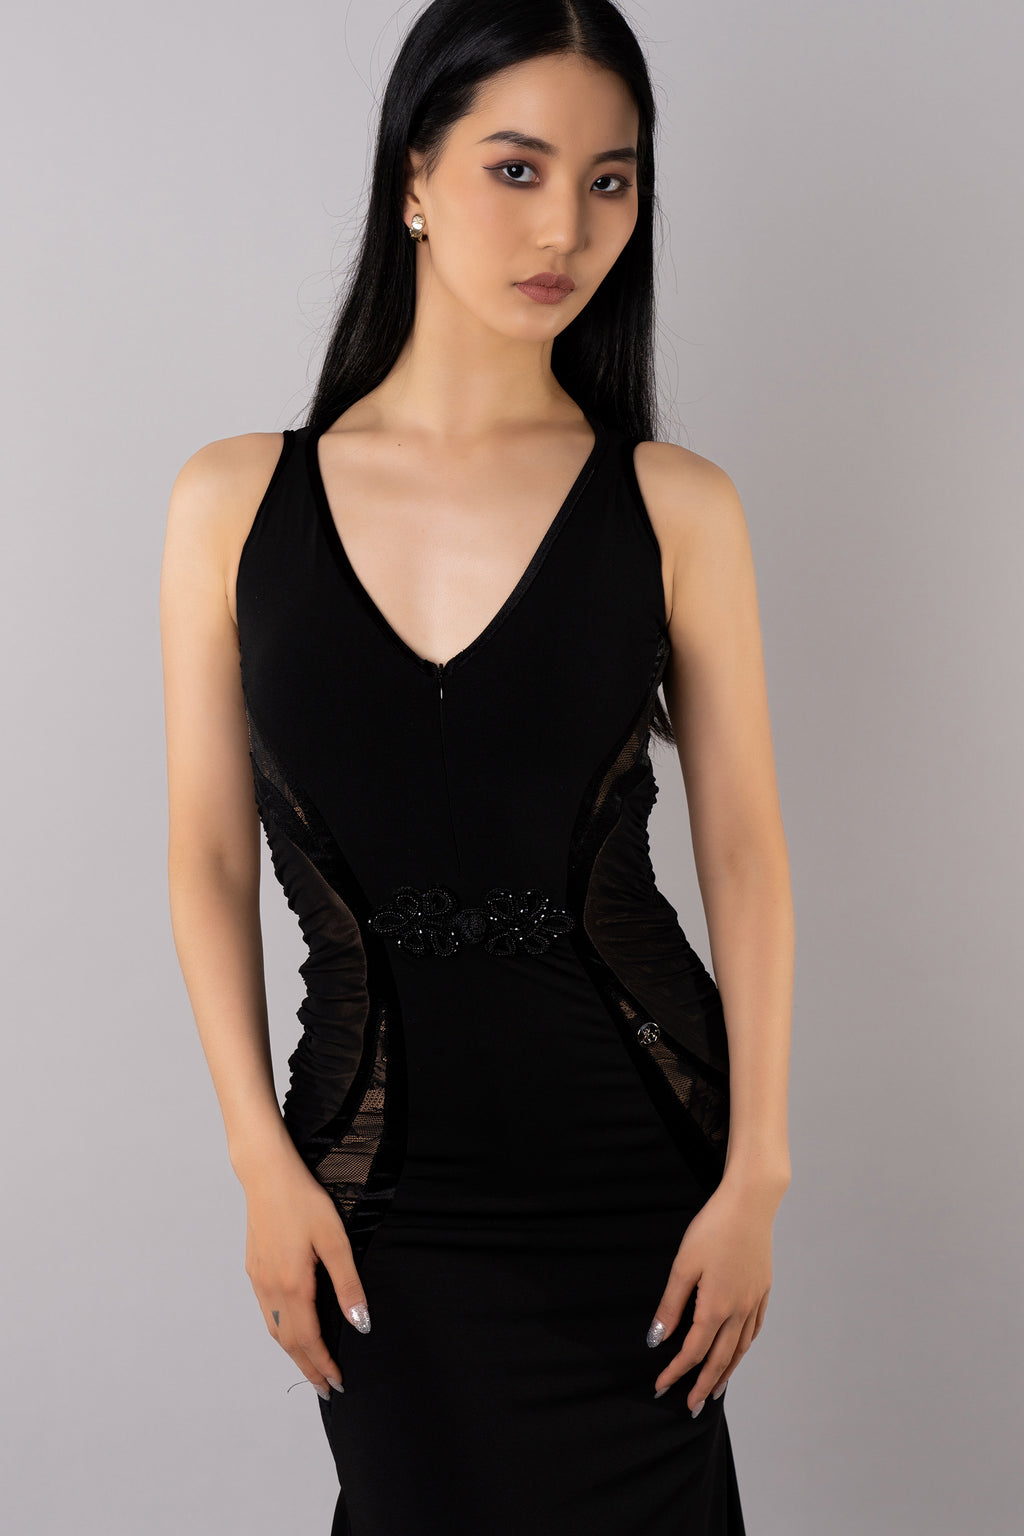 DQ-533 Tailor-Made Cinched Waist Sensual Tattoo Effect Back Dress